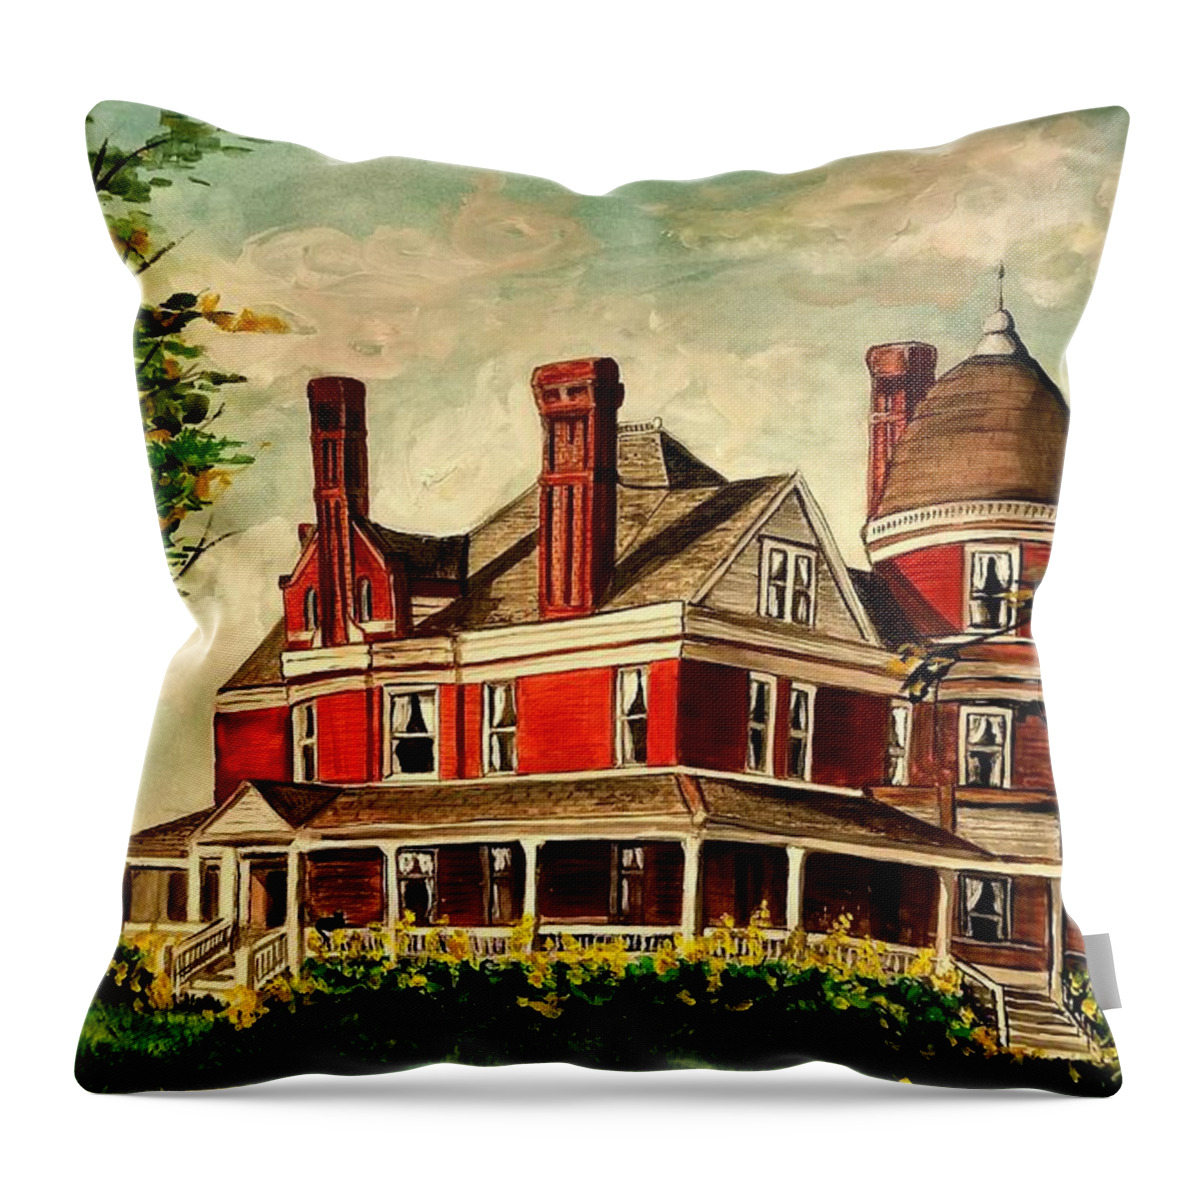 White Hall Throw Pillow featuring the painting White Hall by Alexandria Weaselwise Busen